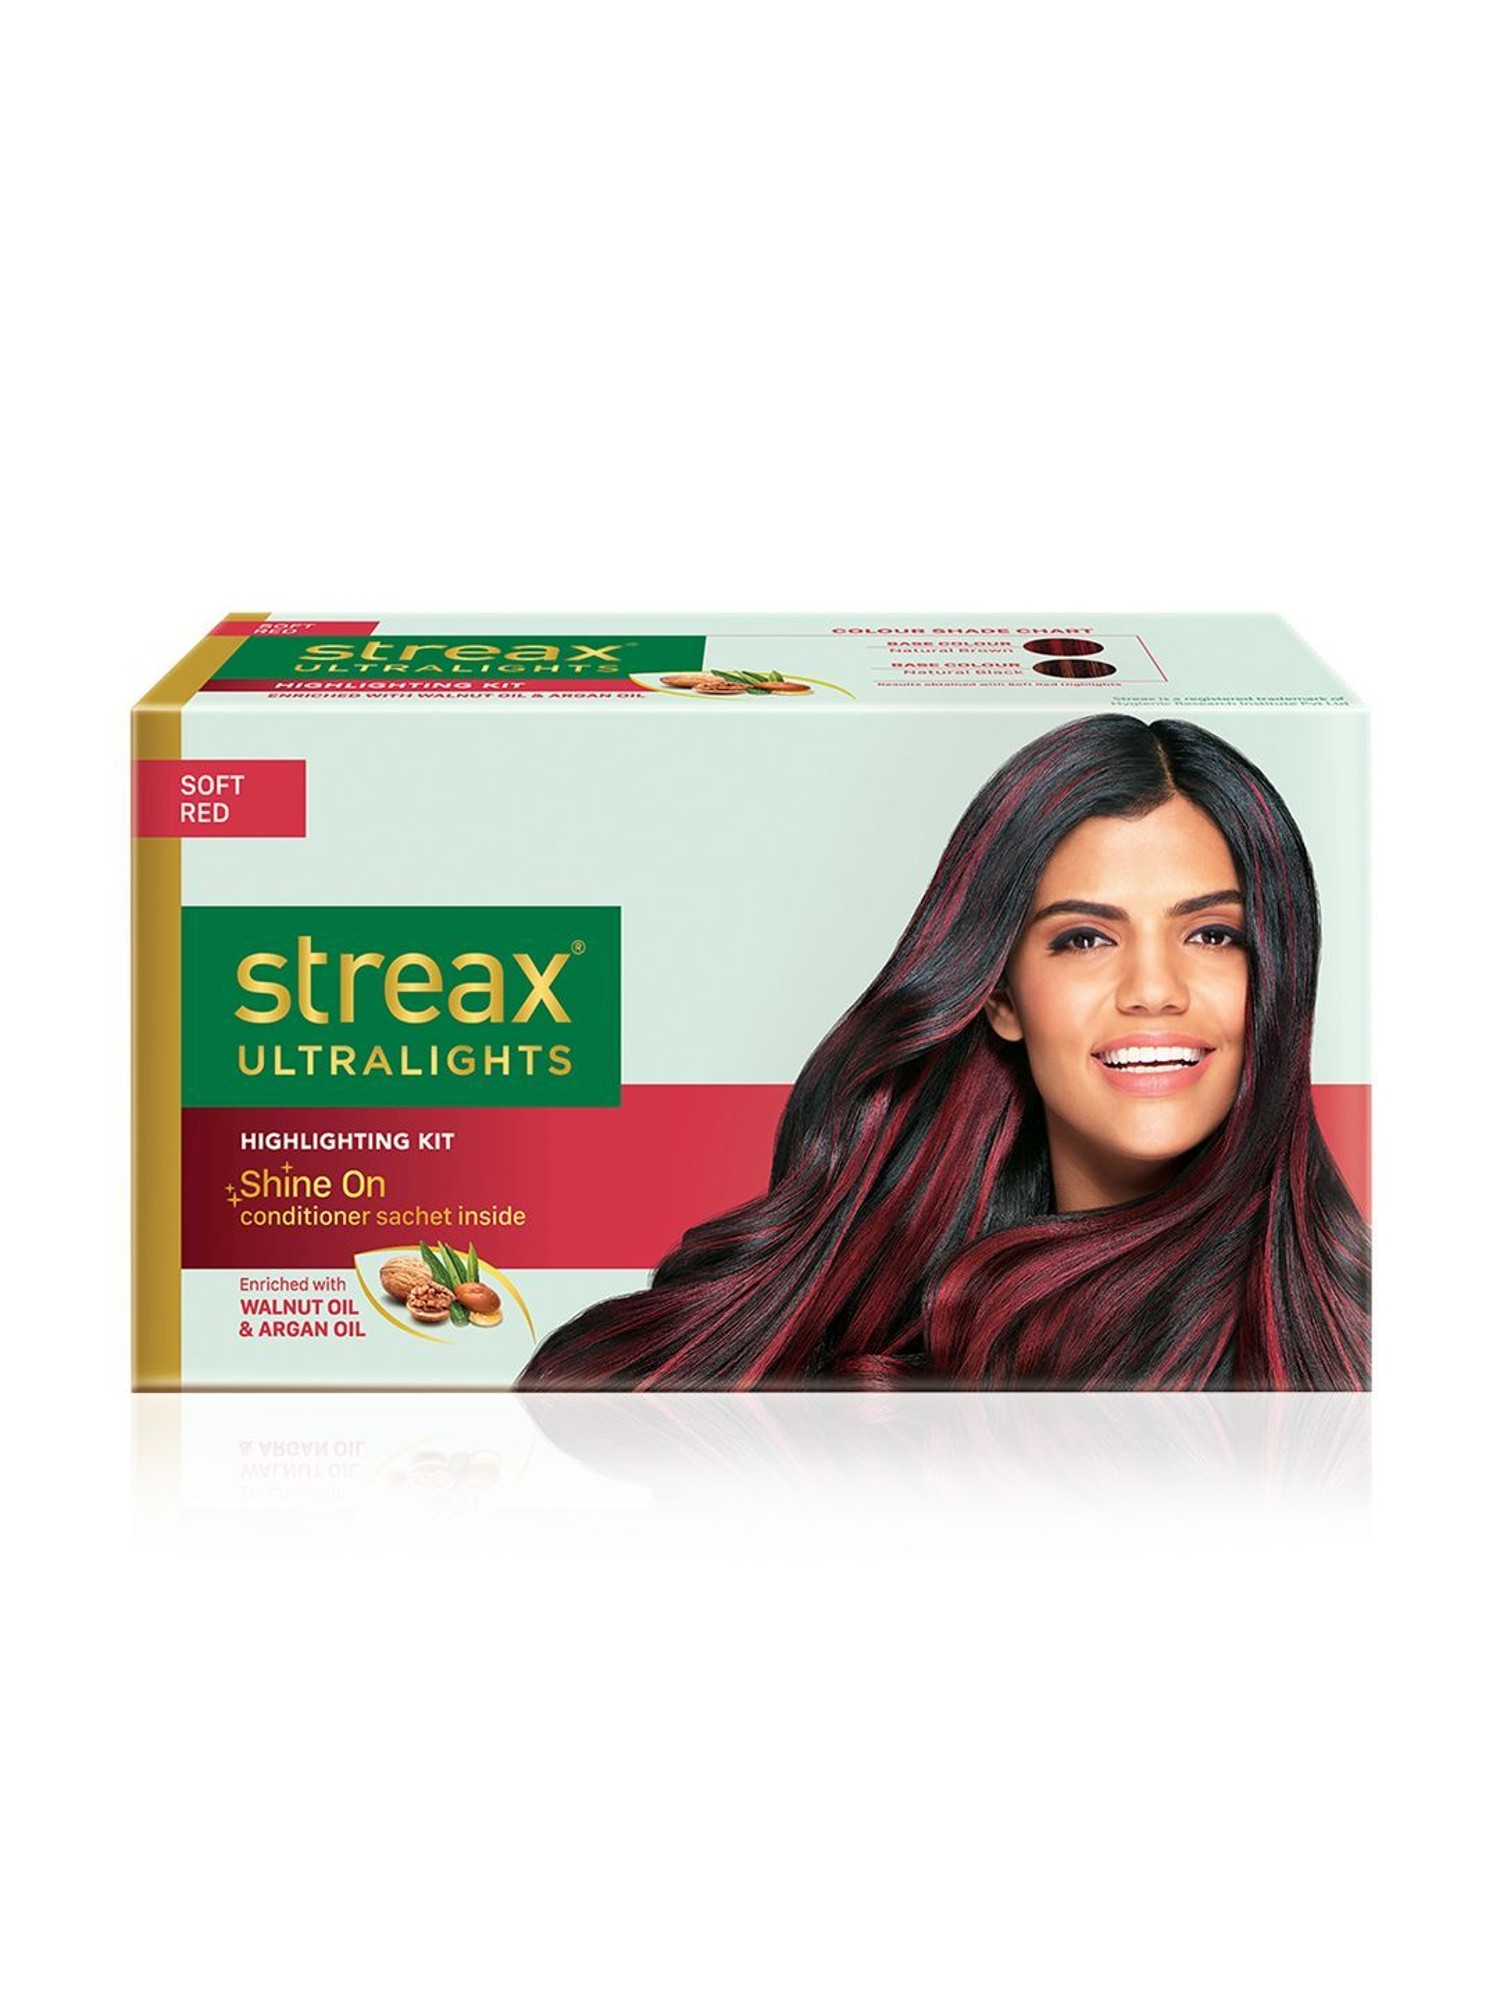 Buy Streax Cream Hair Colour - With Shine On Conditioner, For Smooth &  Shiny Hair Online at Best Price of Rs 25 - bigbasket